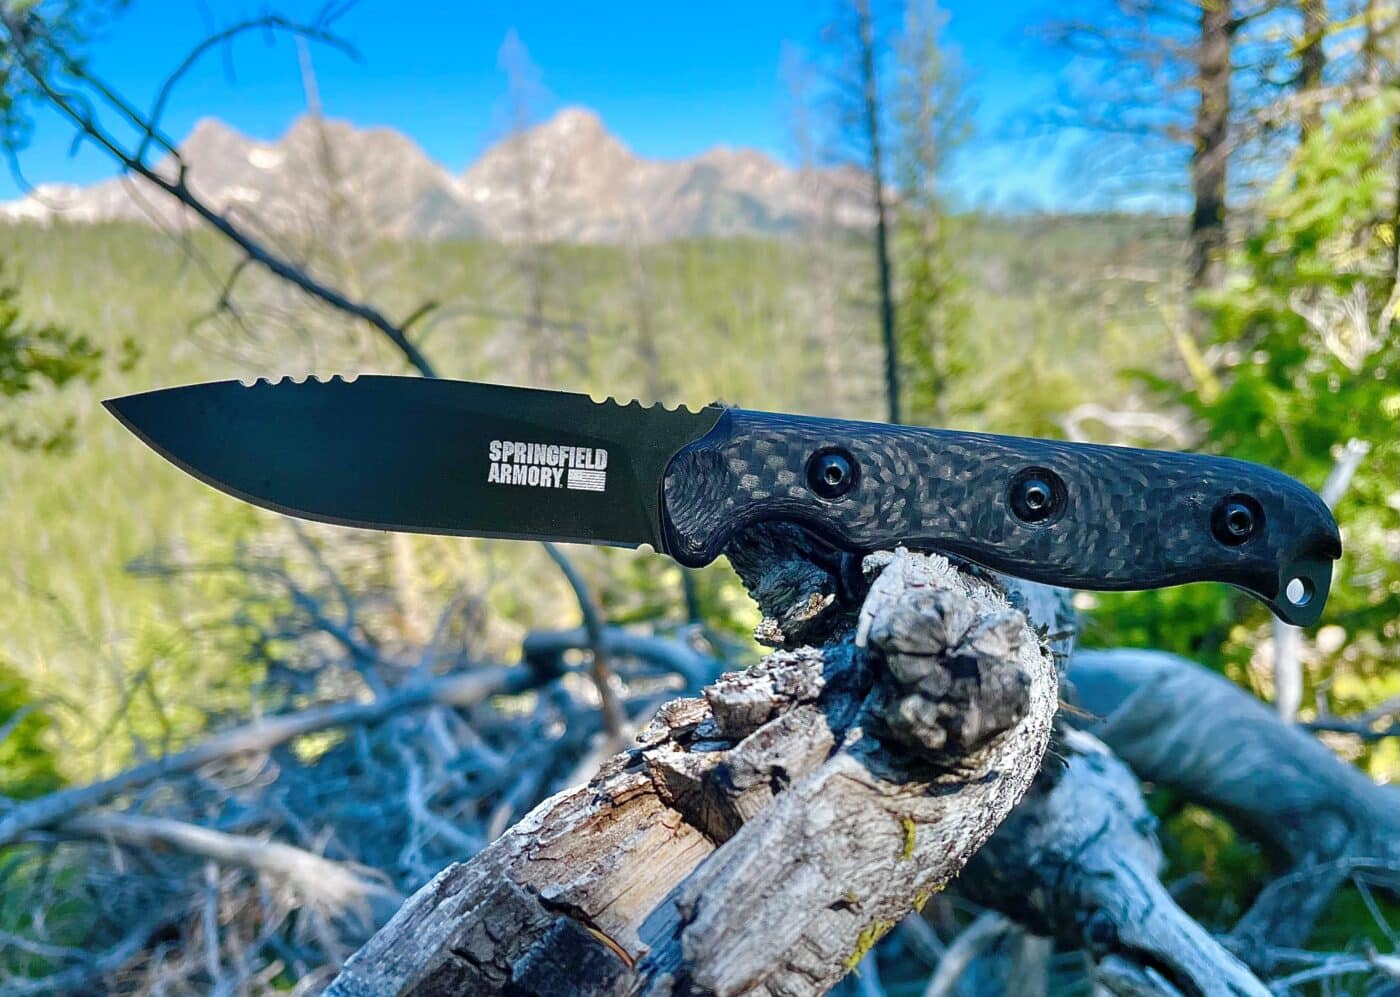 Springfield Armory Model 2020 Knife test and review